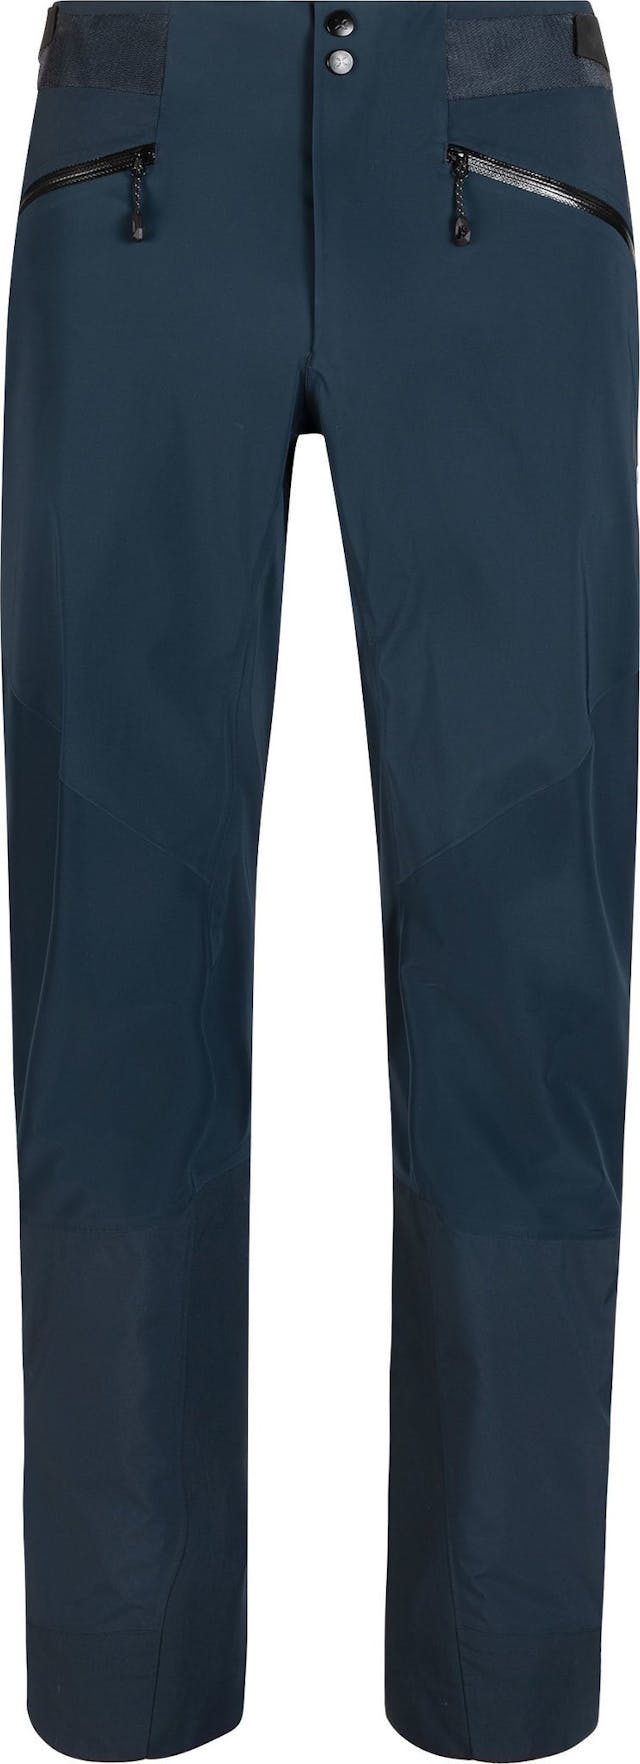 Product image for Nordwand Pro HS Pants - Men's